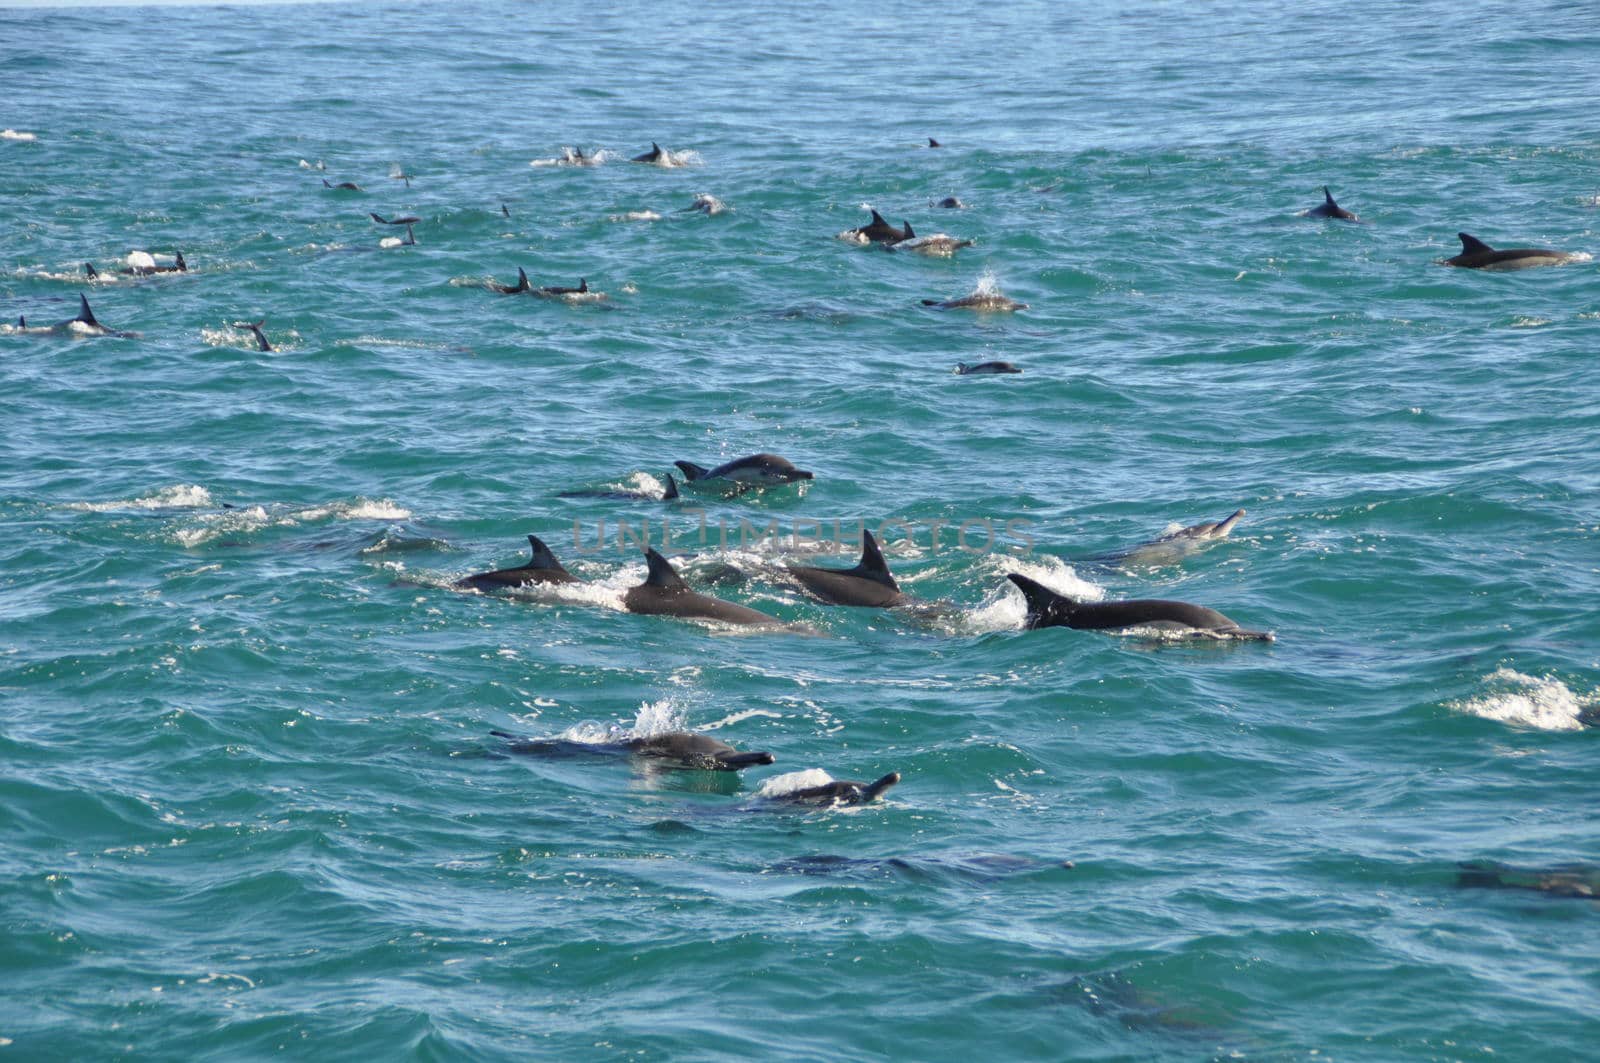 A school of dolphins near hermanus in the indian ocean